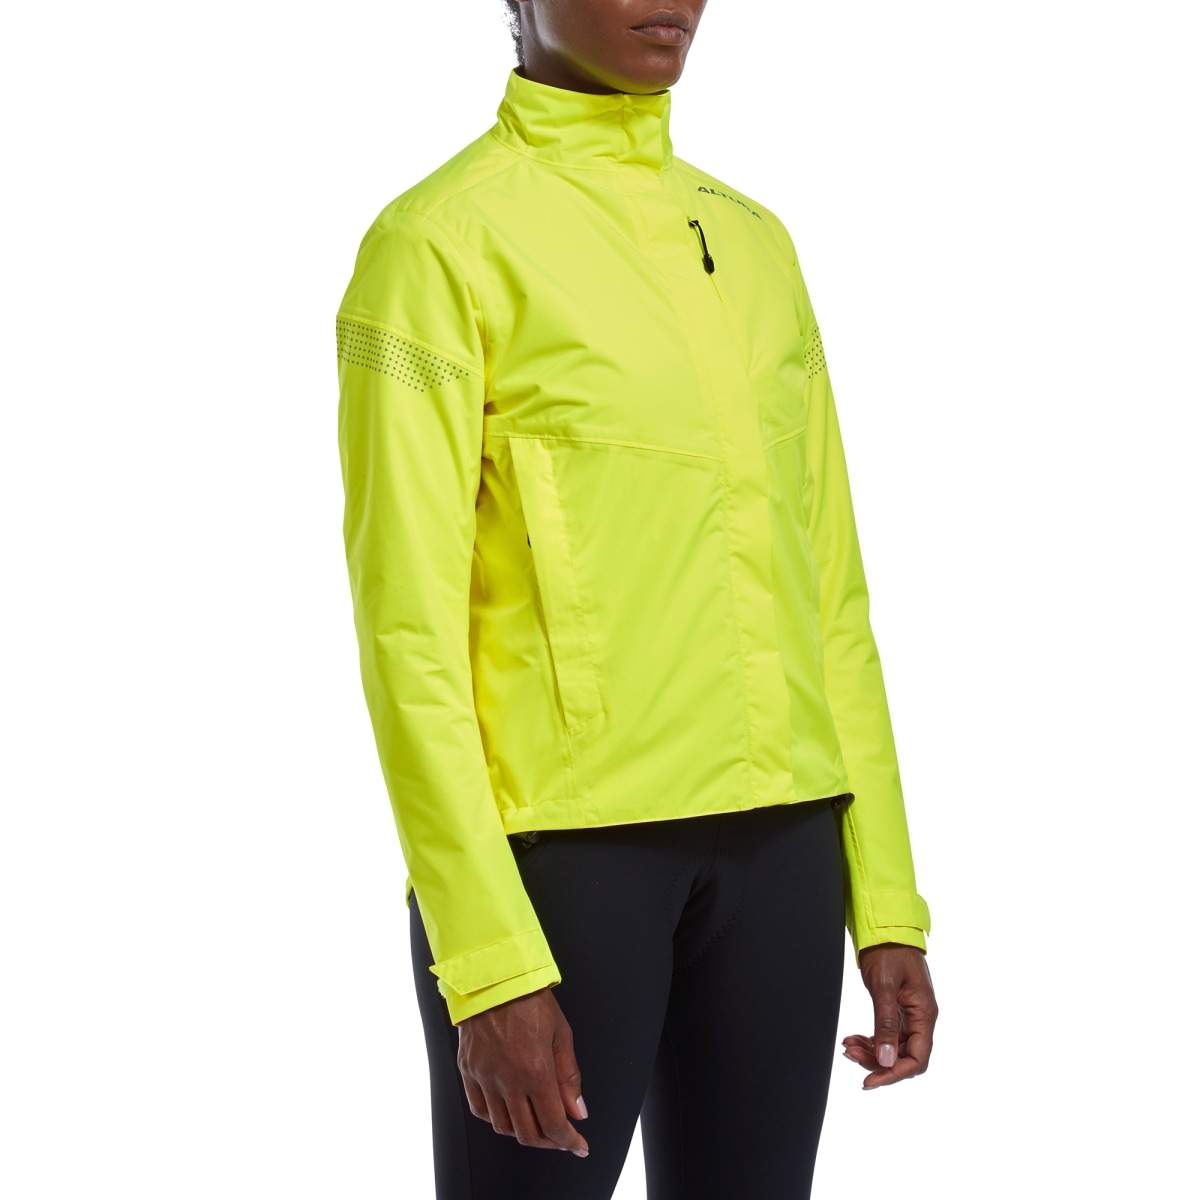 Cycles UK Altura  Nevis Nightvision Womens Jacket 10 YELLOW